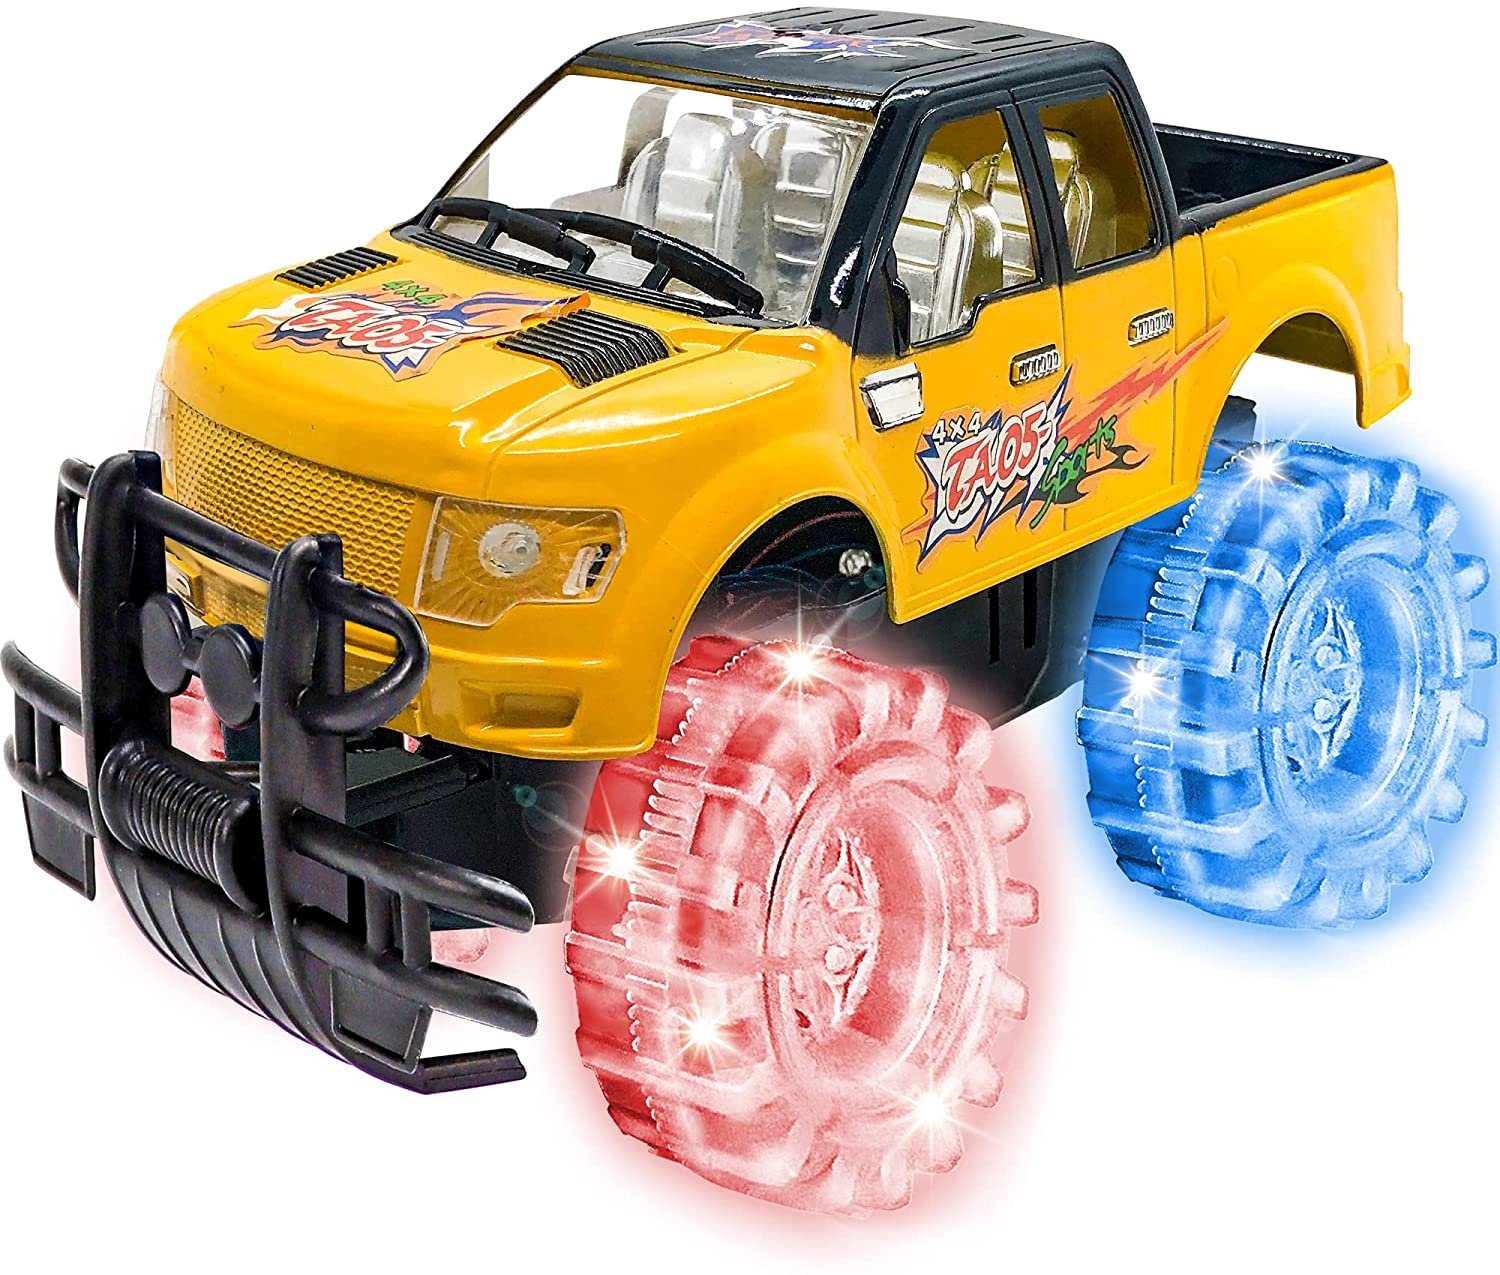 ArtCreativity Light Up Yellow & Black Monster Truck, 1 Piece, 8 Inch Monster Truck with Flashing LED Tires & Batteries, Push n Go Car Toys for Kids, Fun Gift for Boys & Girls Ages 3 & Up…